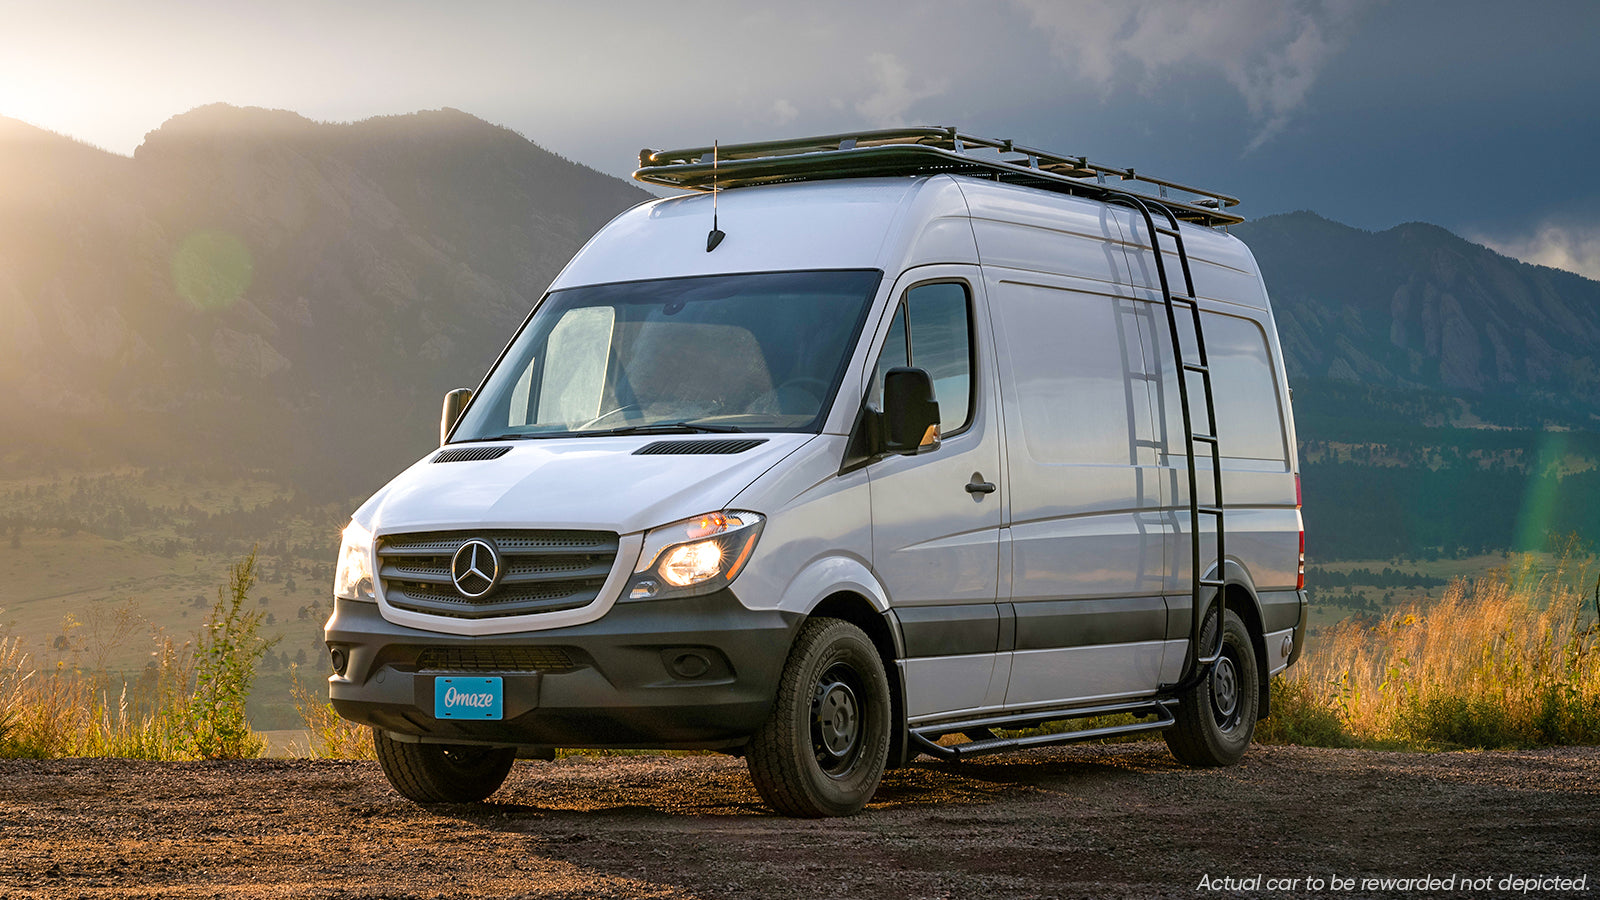 Win a Dream Sprinter Van with 60,000 Worth of Customizations